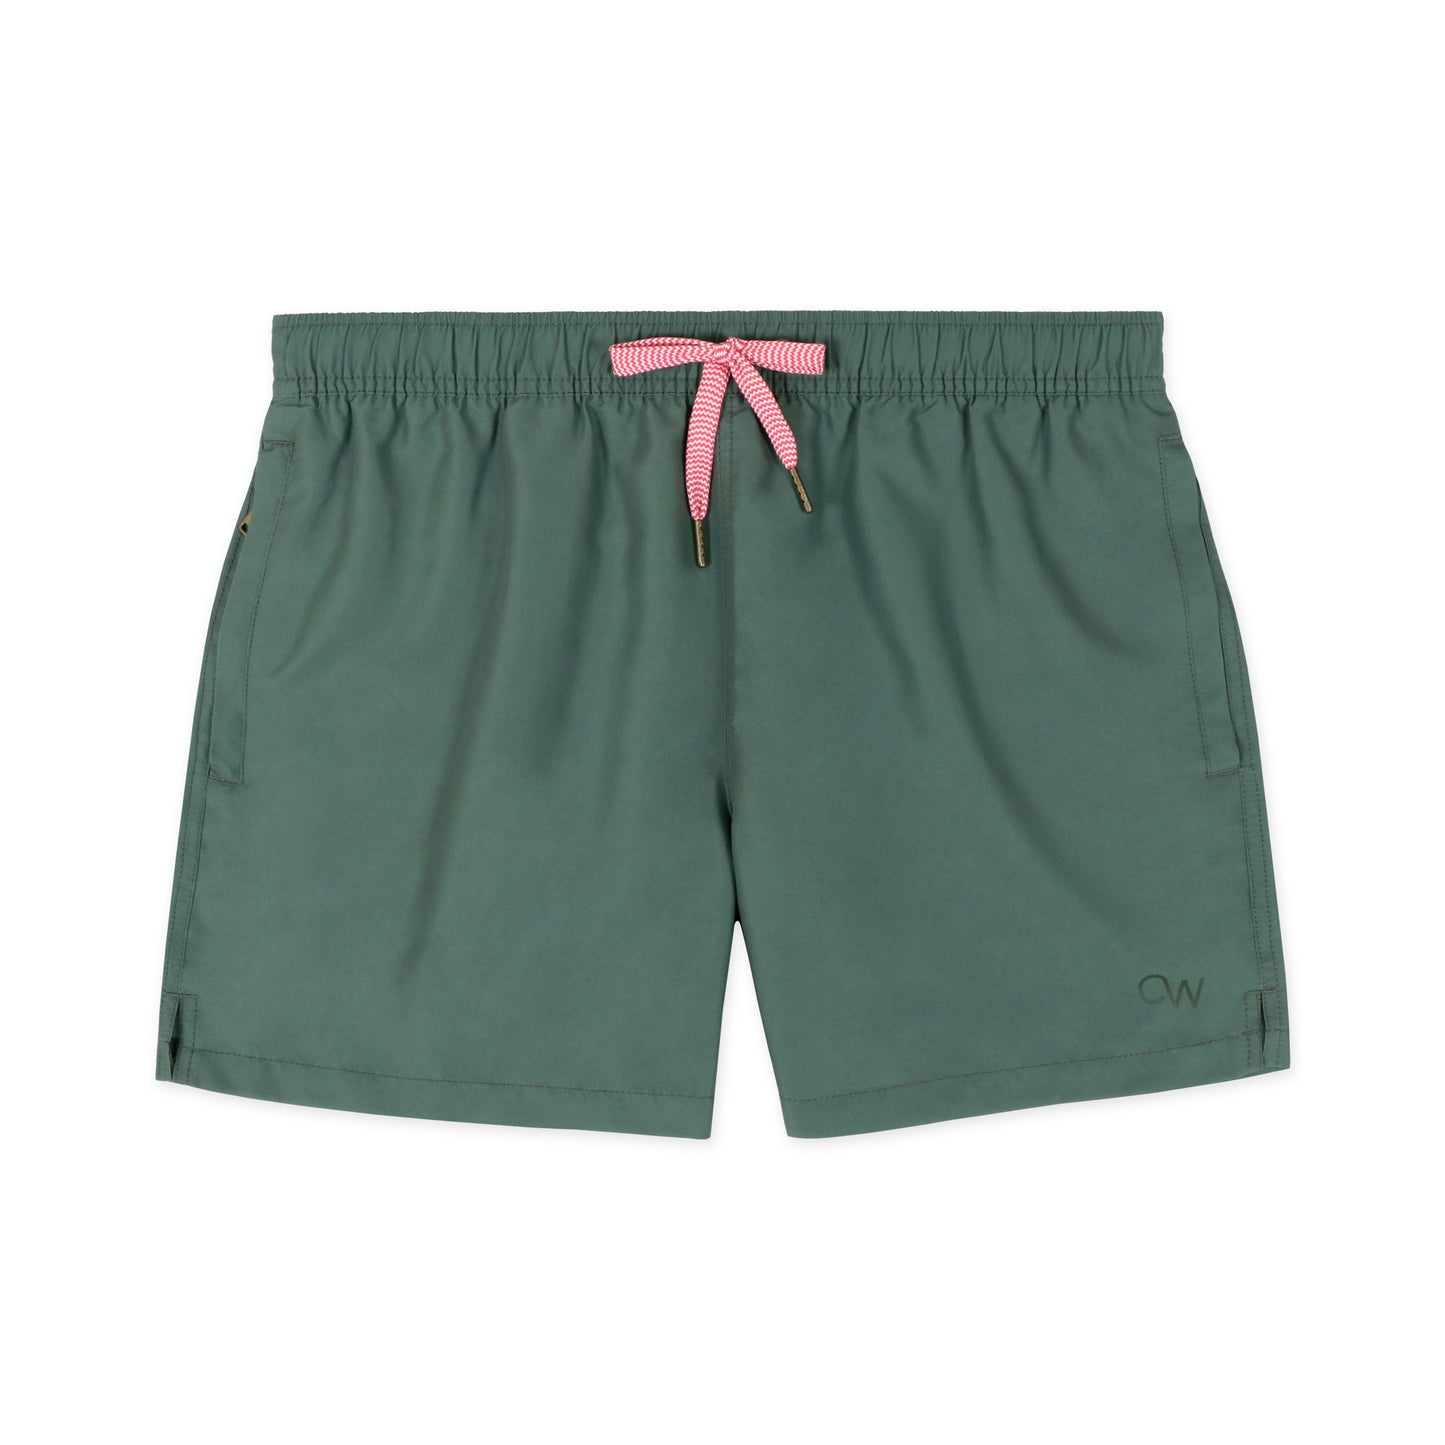 OWSS2102 Olive Green Recycled Polyester Men's Swim Short